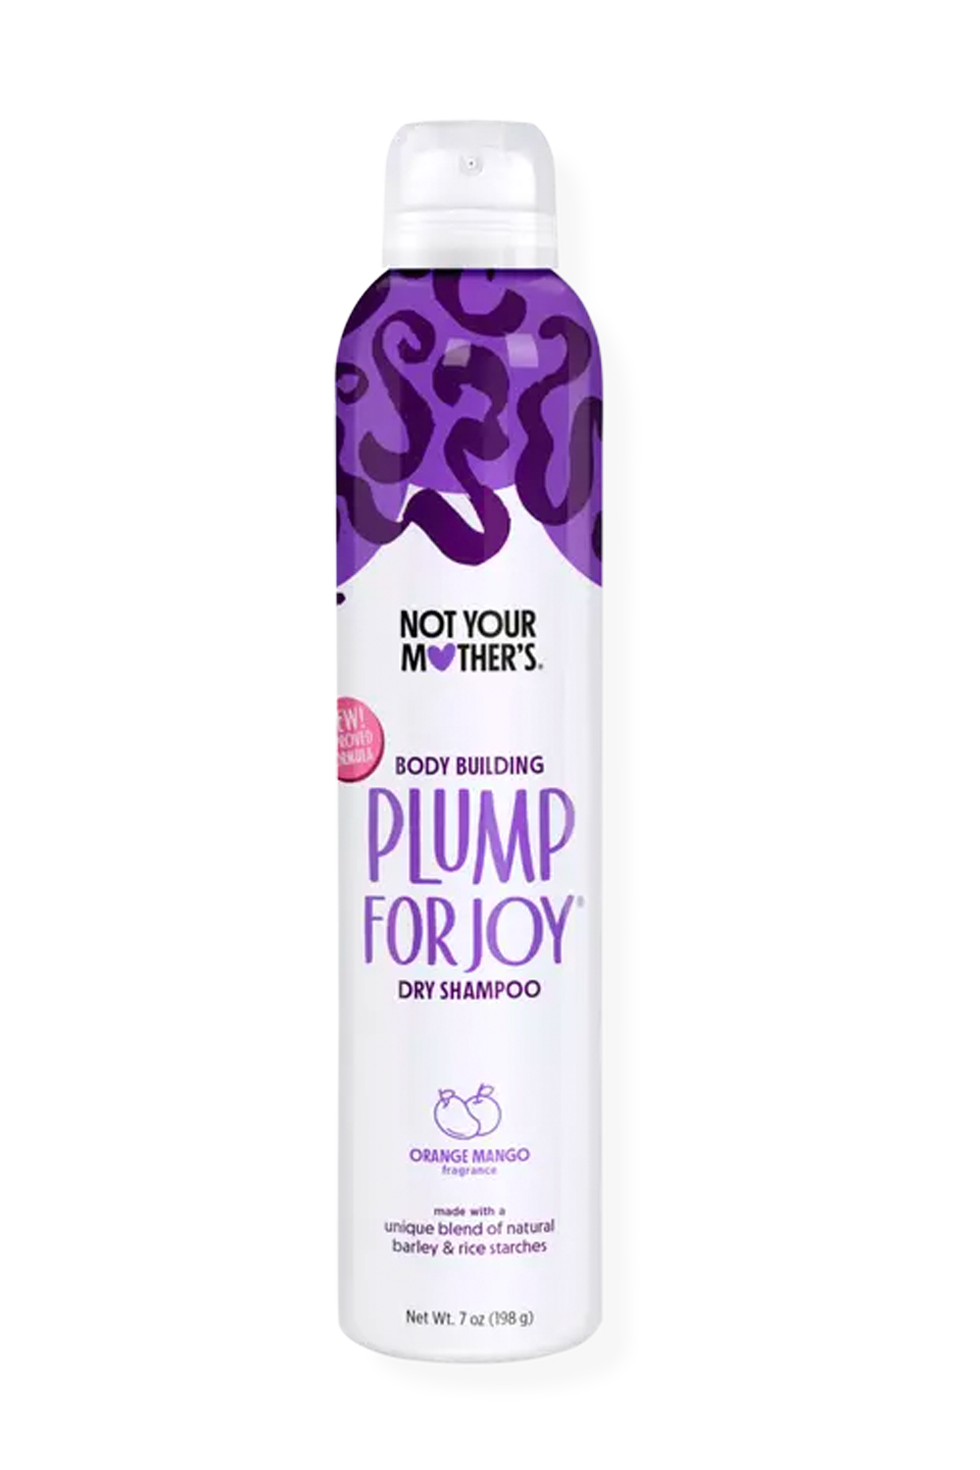 Not Your Mother's Plump For Joy Body-Building Dry Shampoo